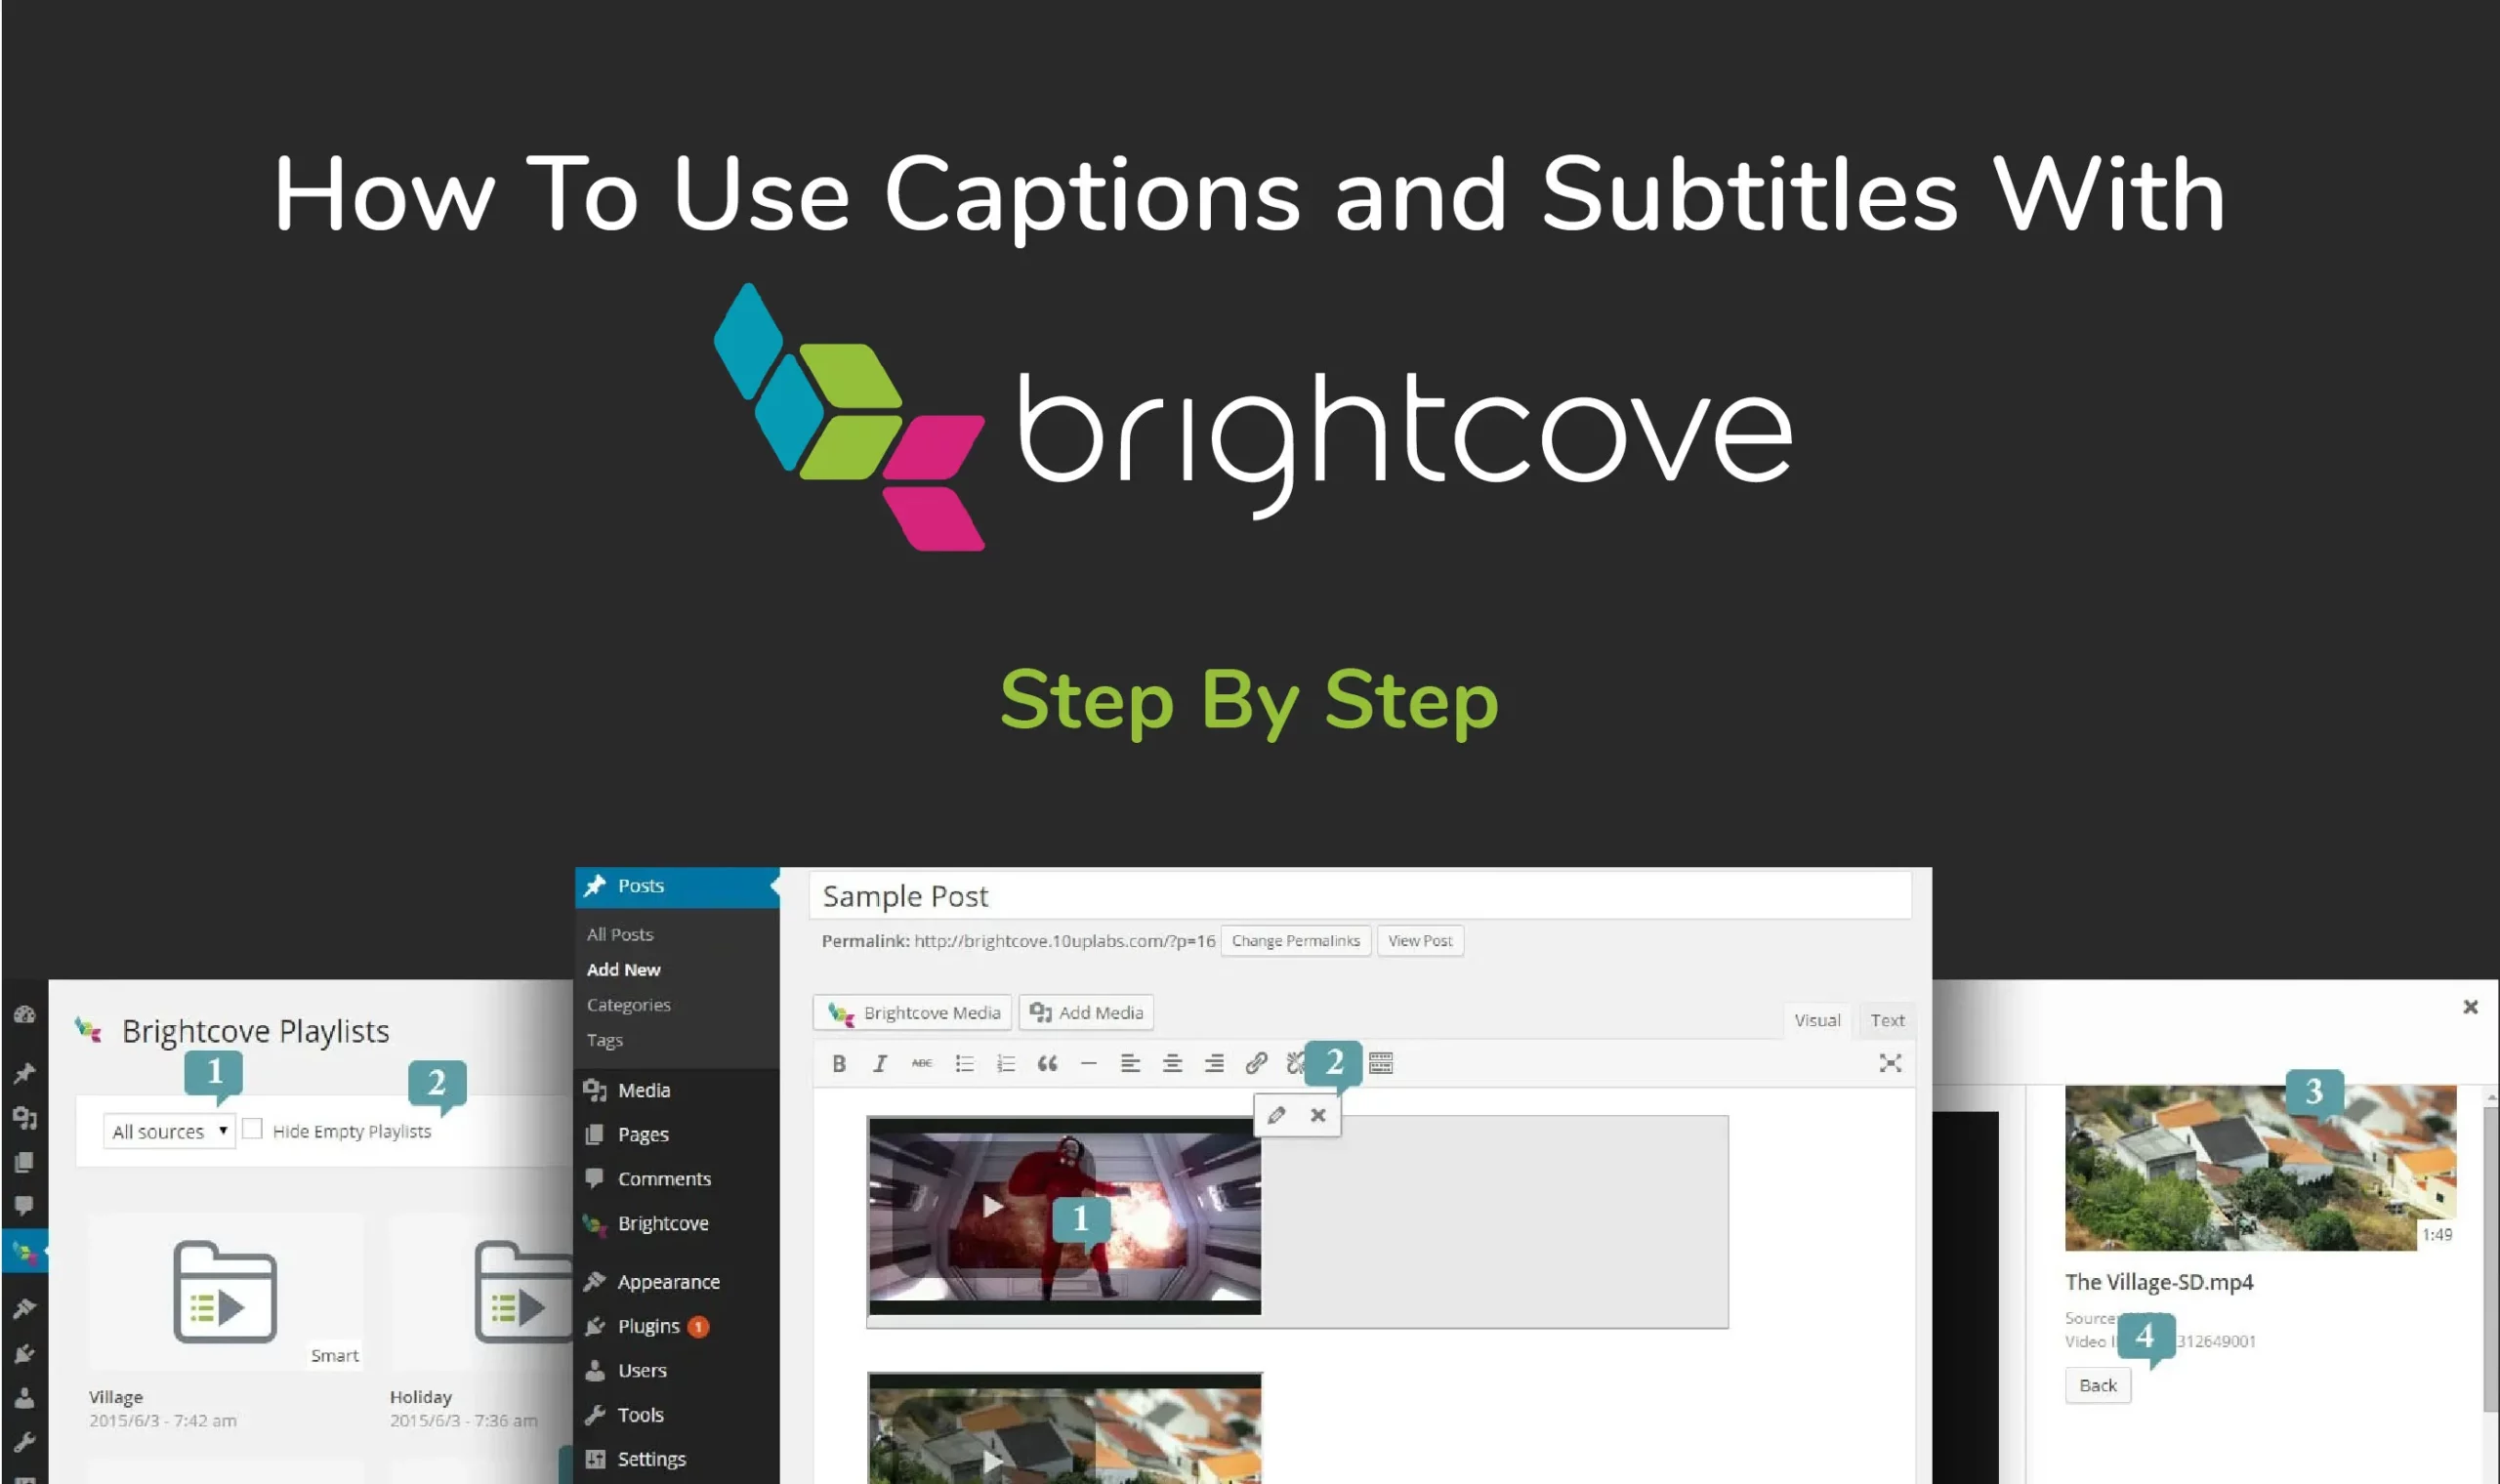 How To Use Captions and Subtitles With Brightcove Step By Step